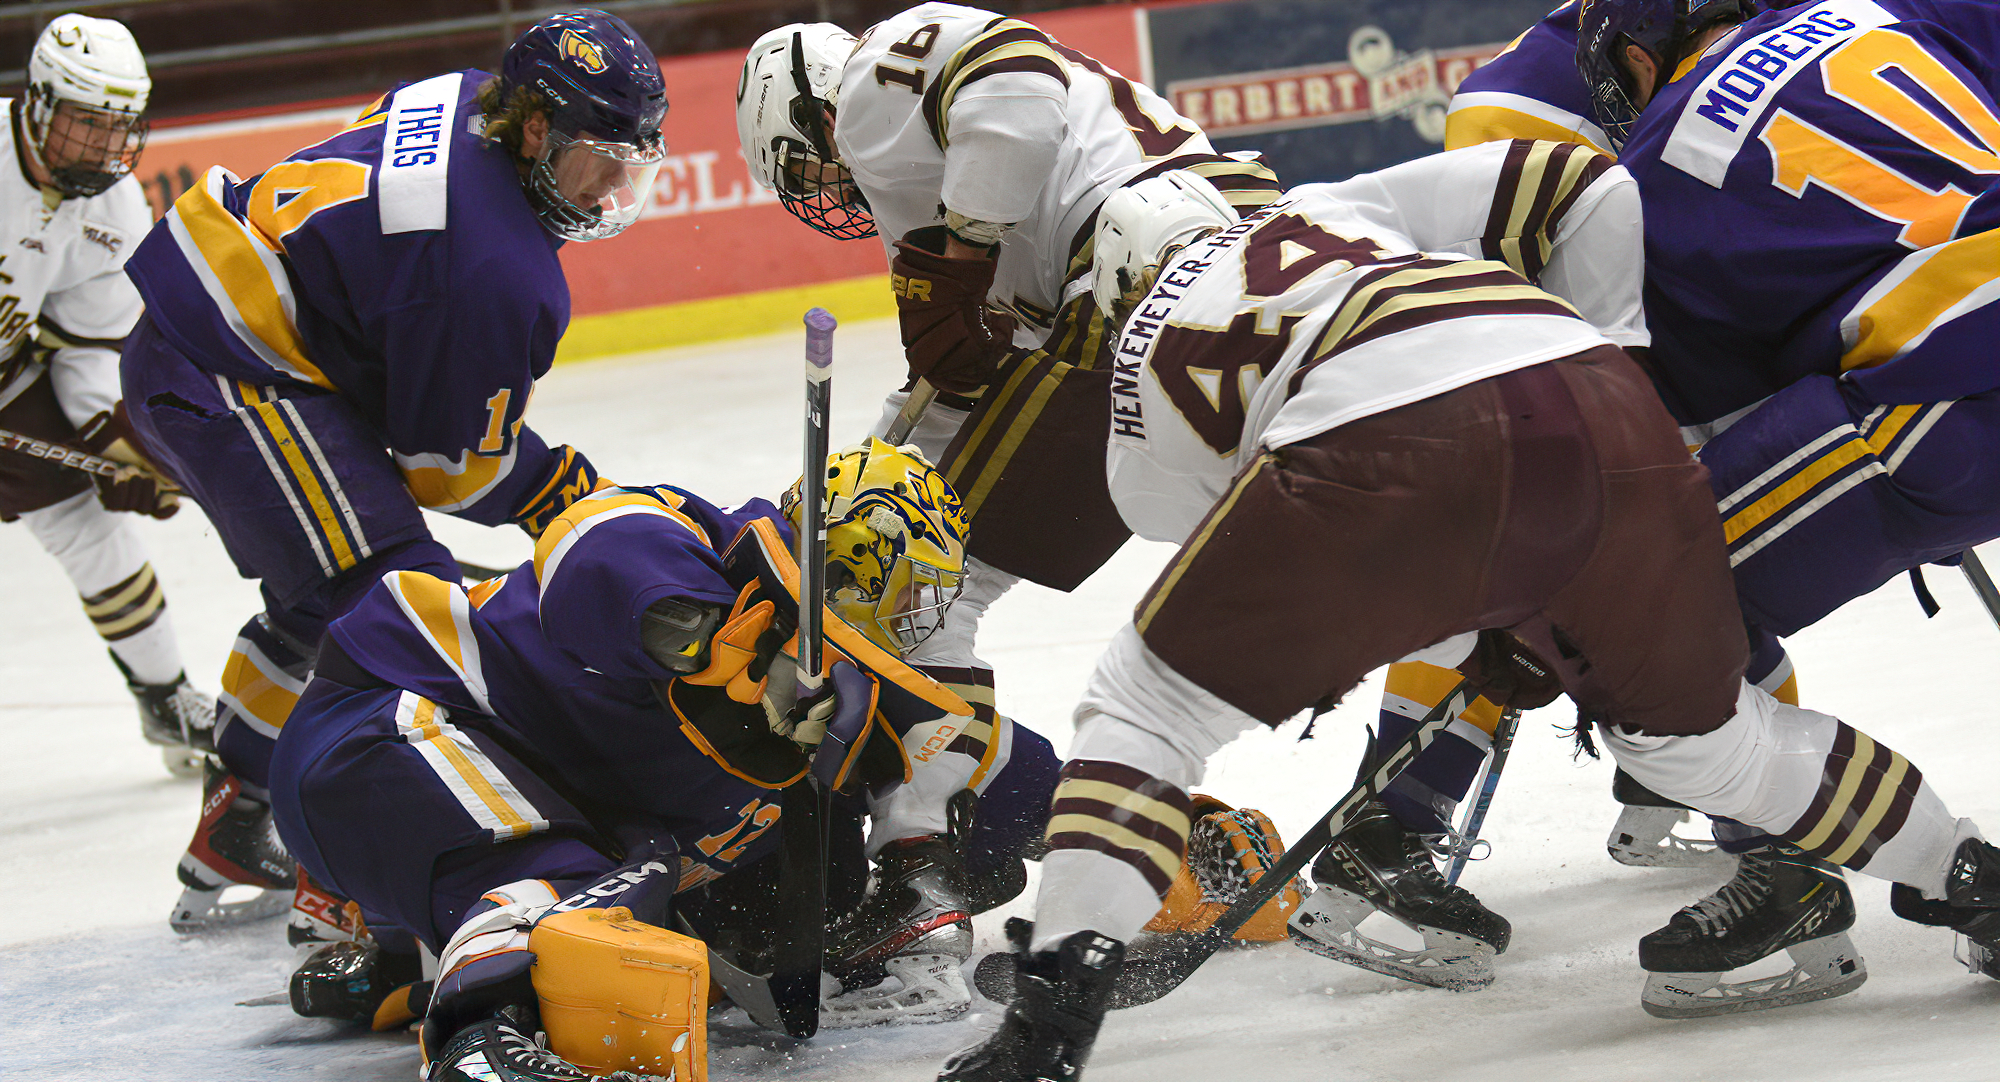 Concordia gave up five unanswered goals in the third period and lost at #8 UW-Stevens Point.